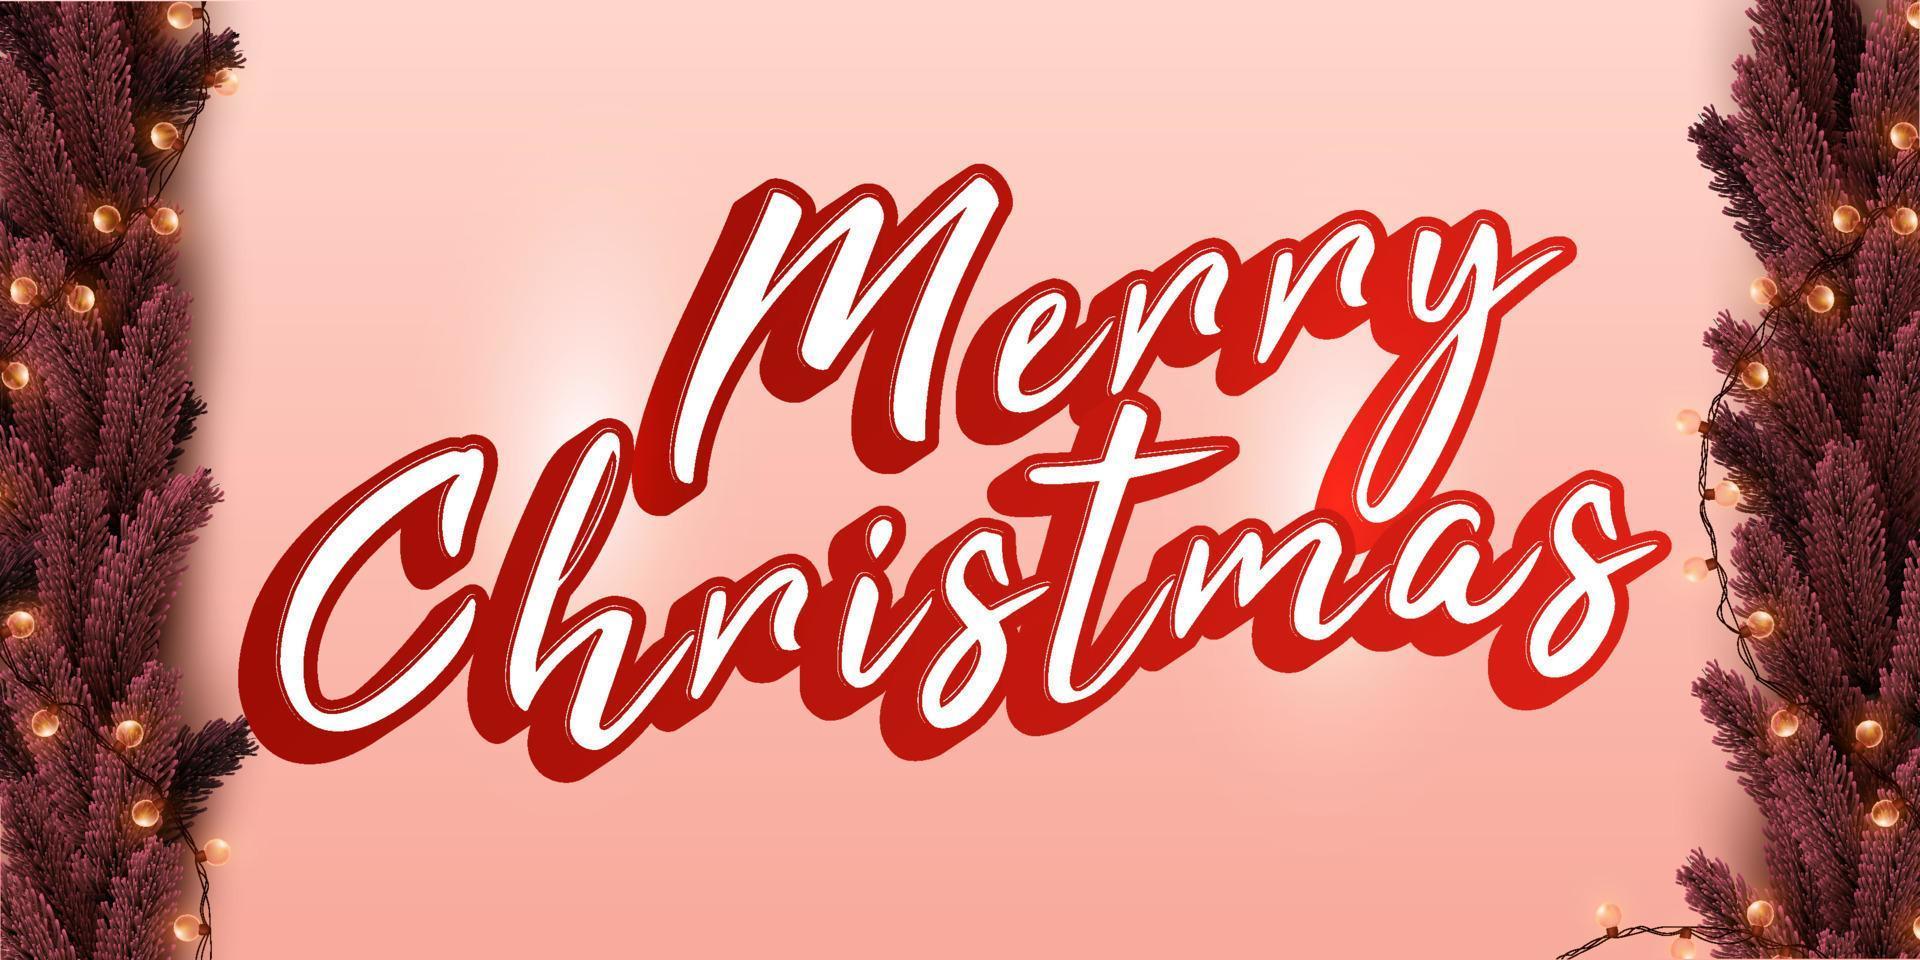 Merry christmas cartoon 3d text, pine tree leaves and light bulbs on light red background vector